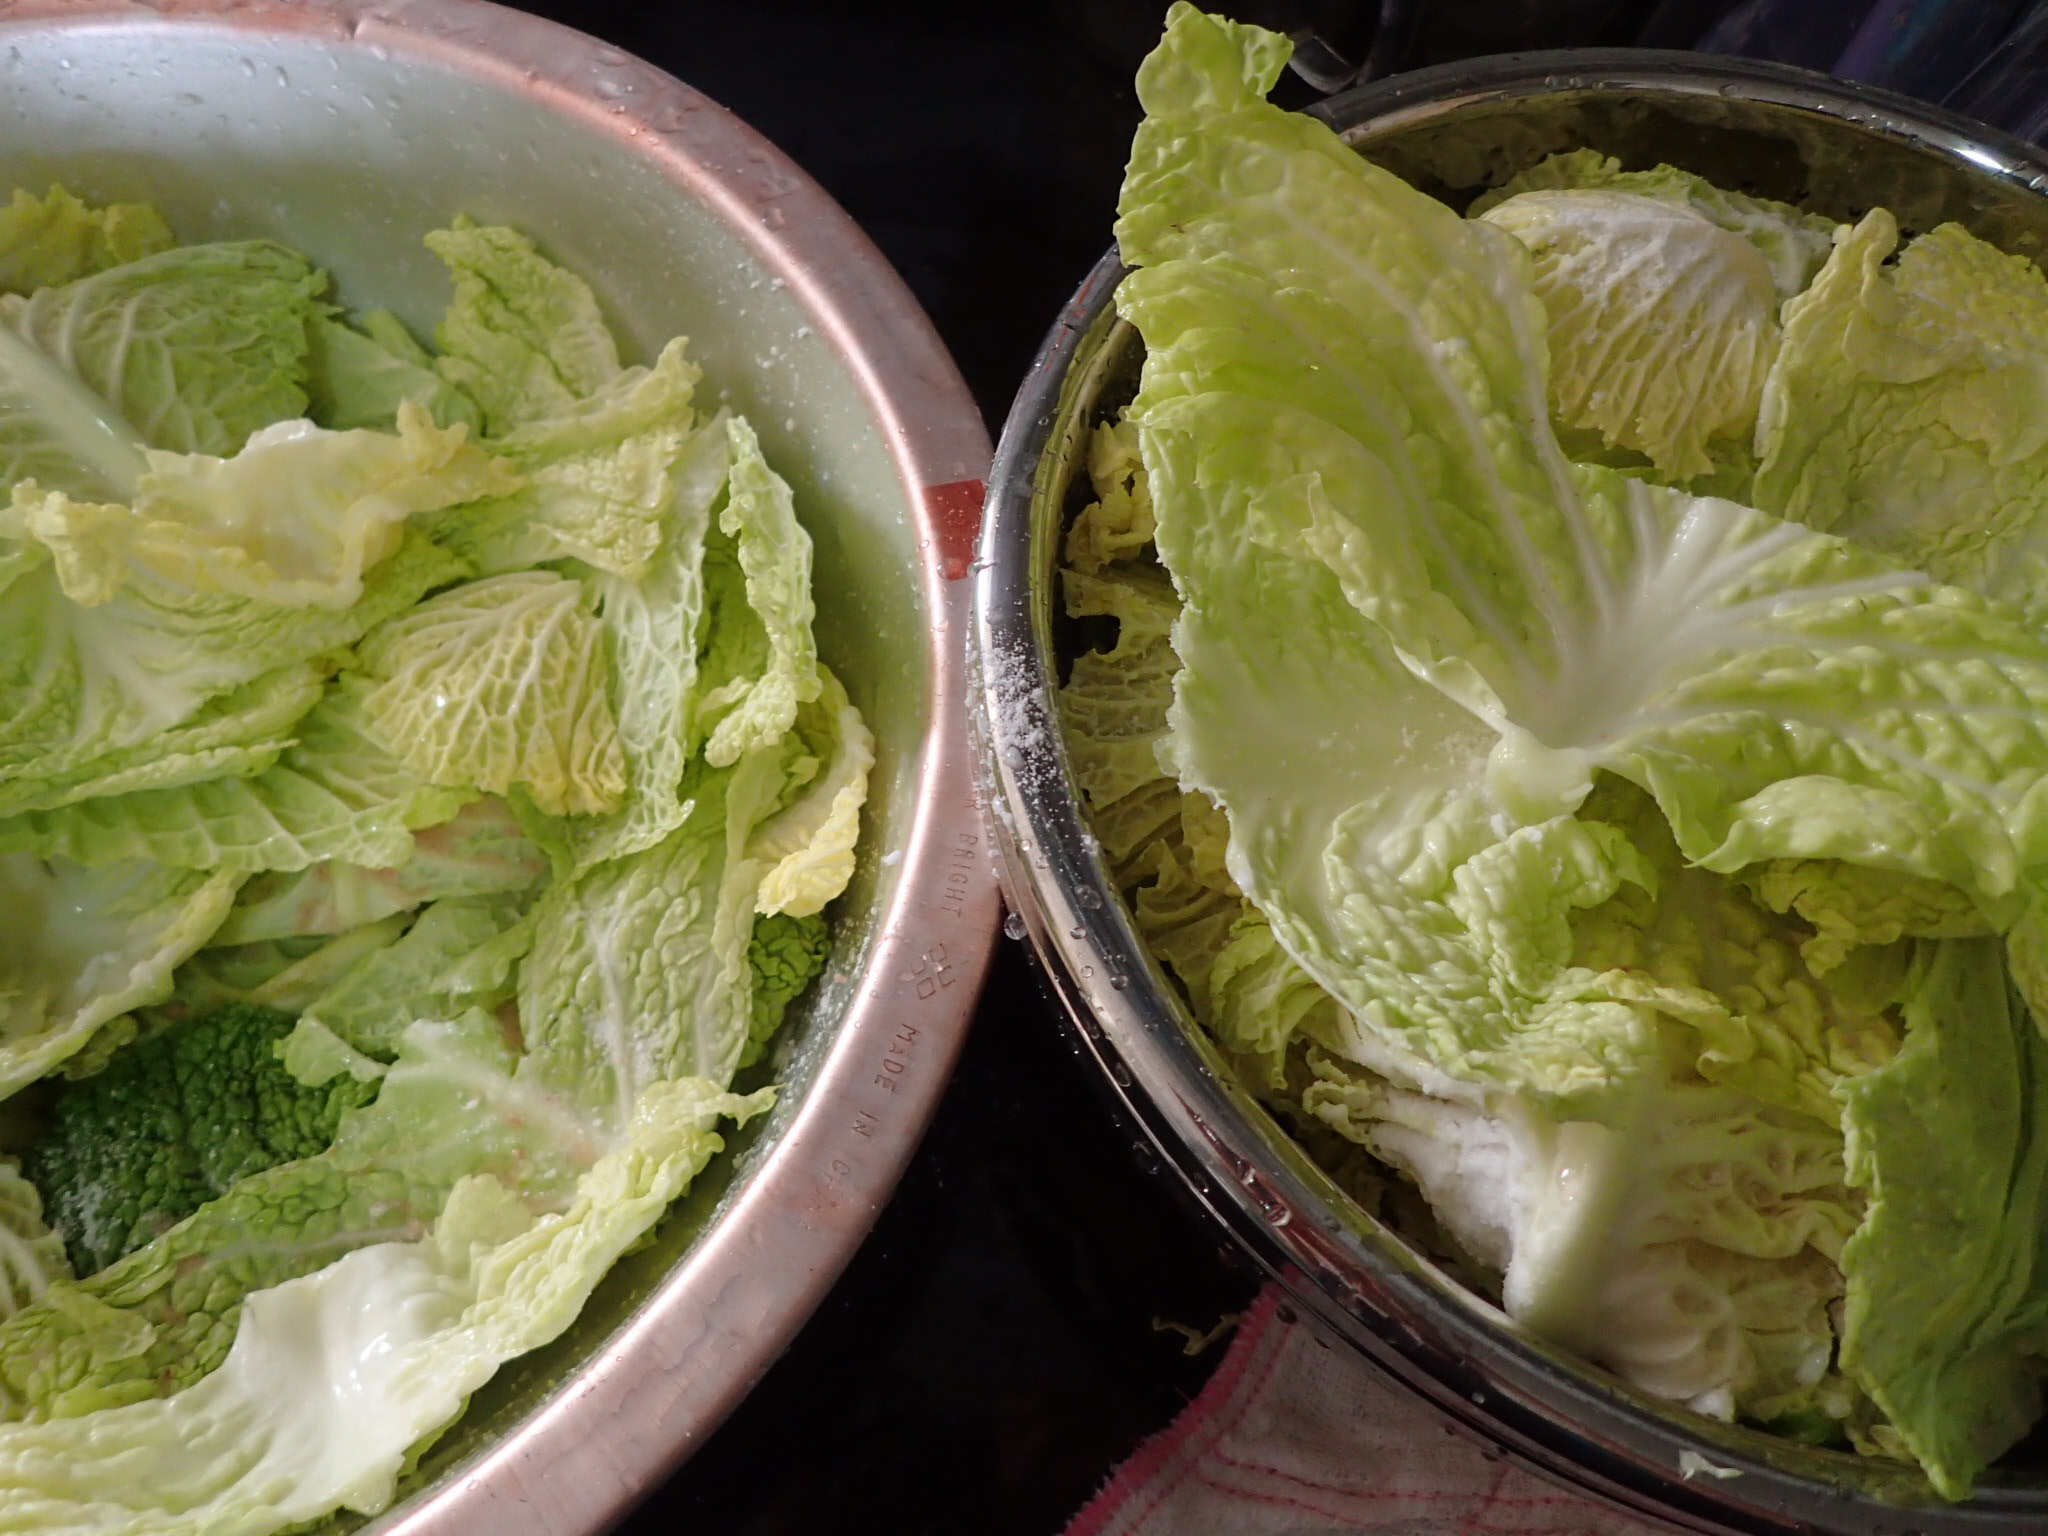 Salting the cabbage